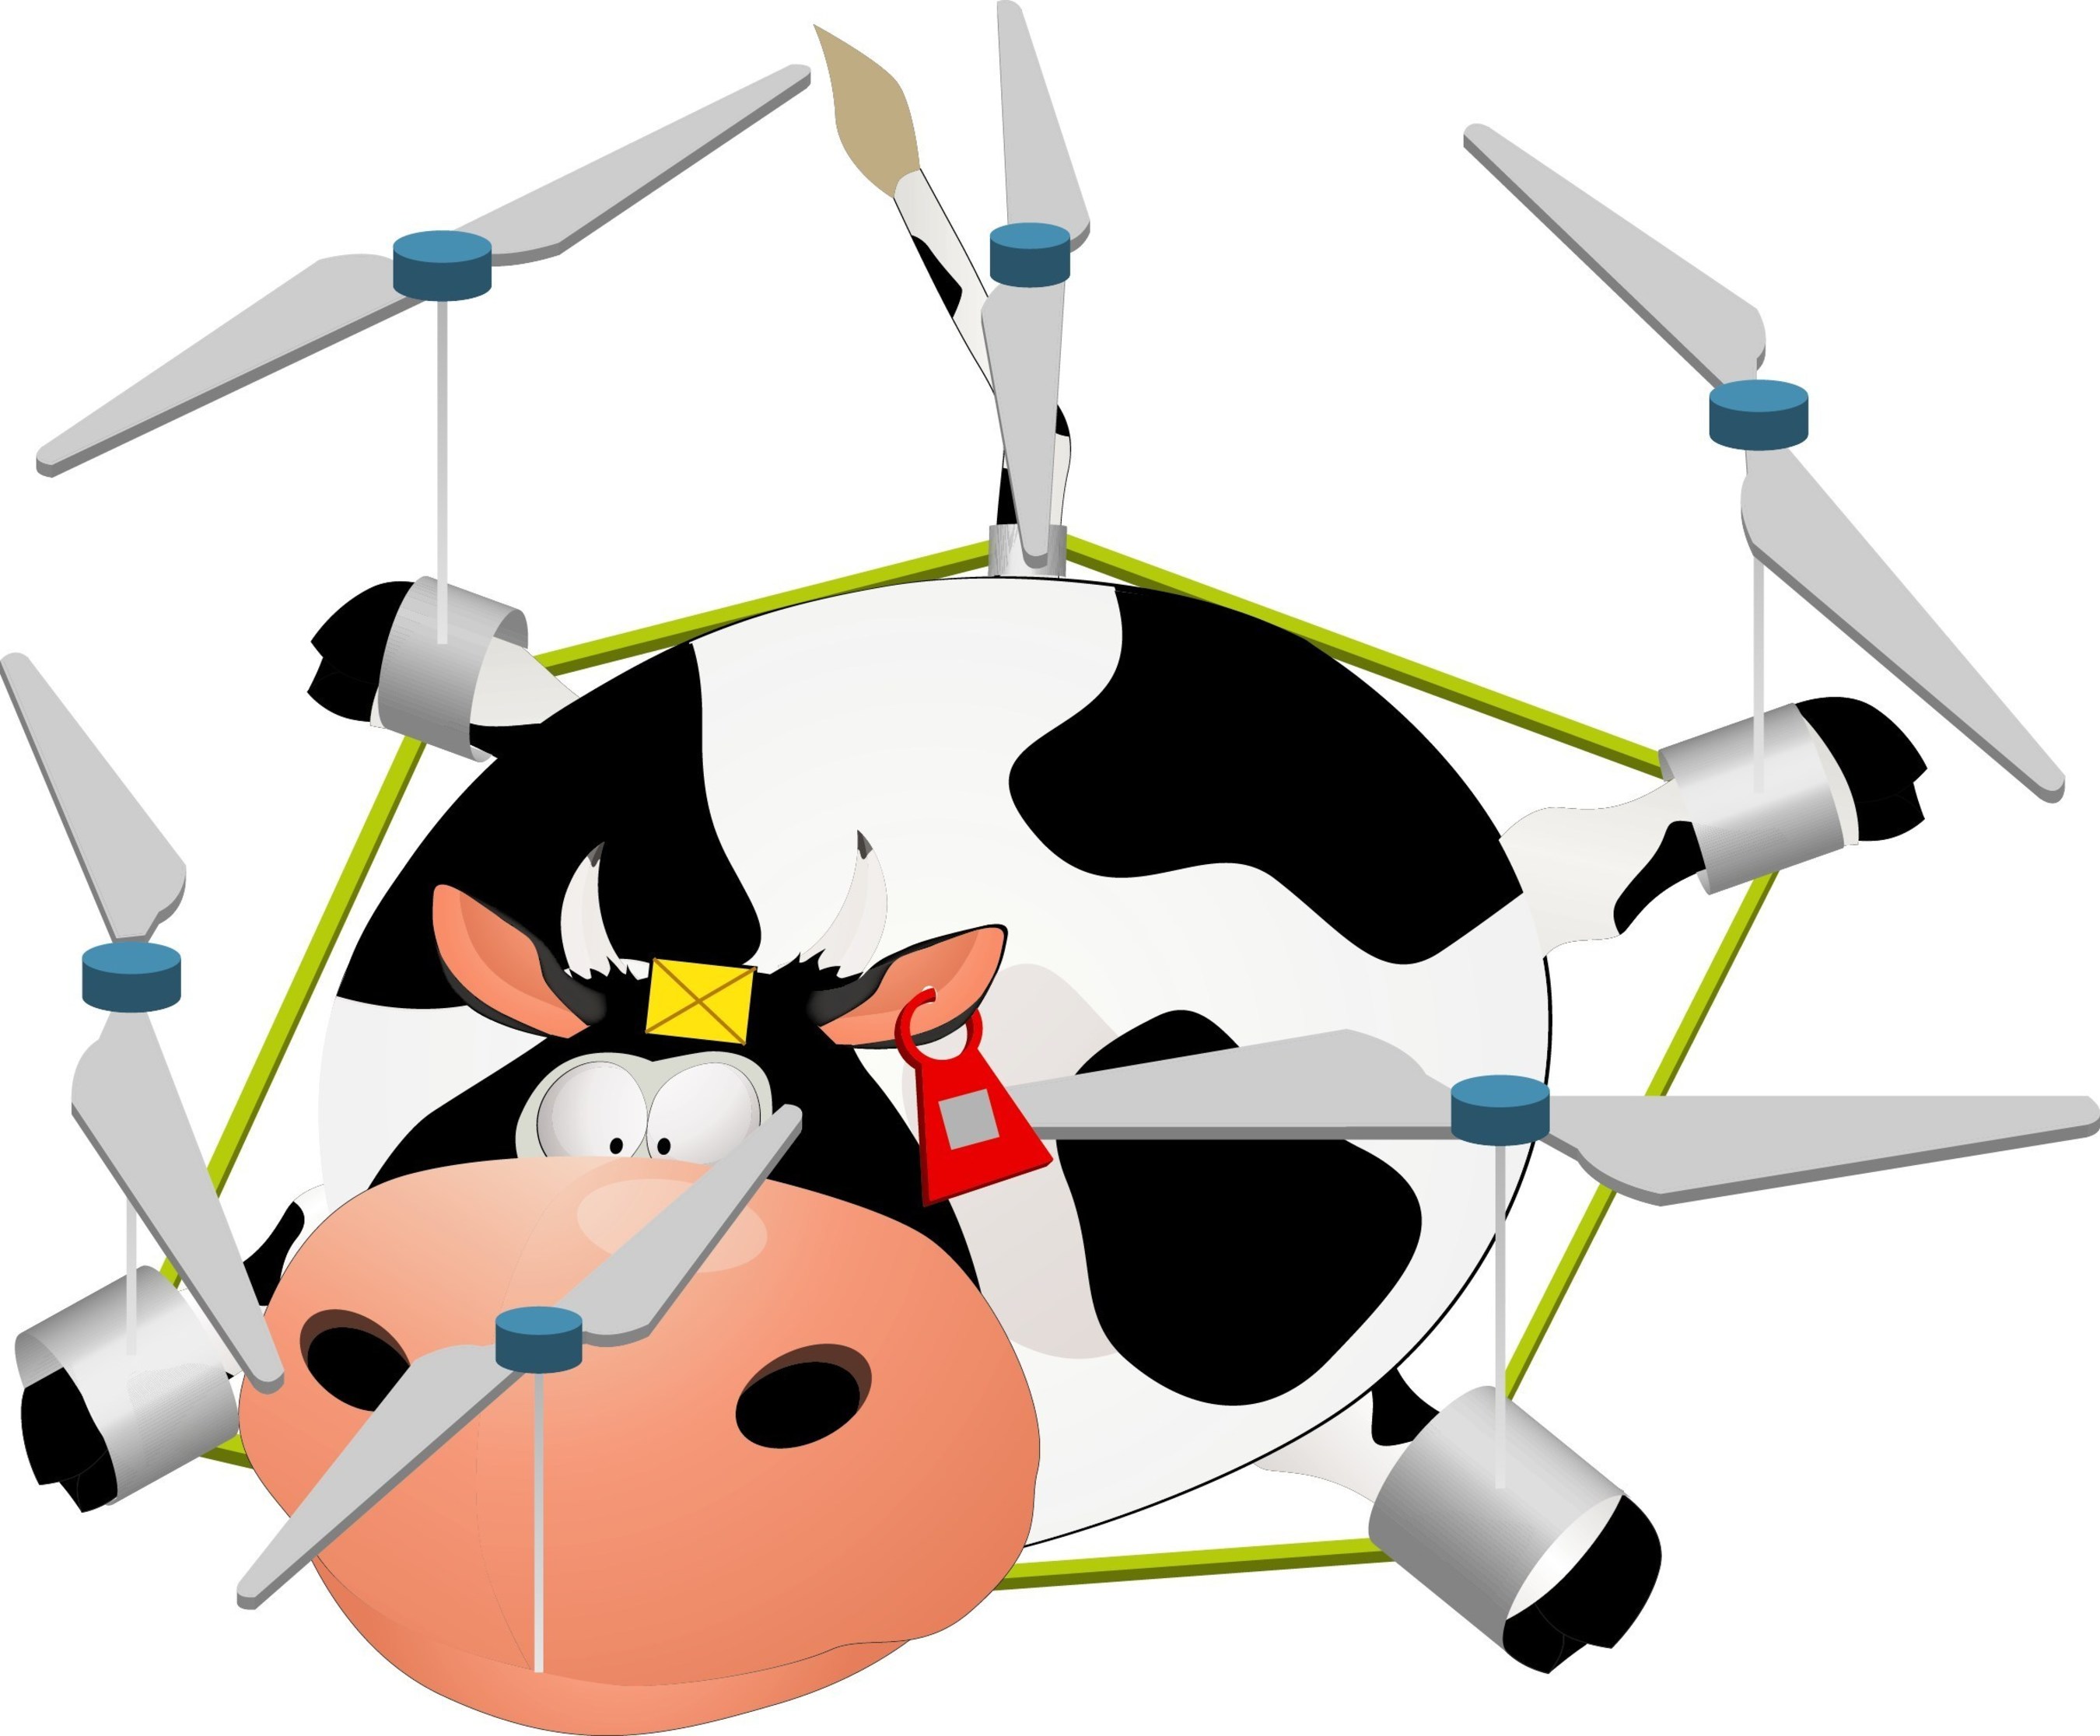 Let the "Cow Copter" fly.